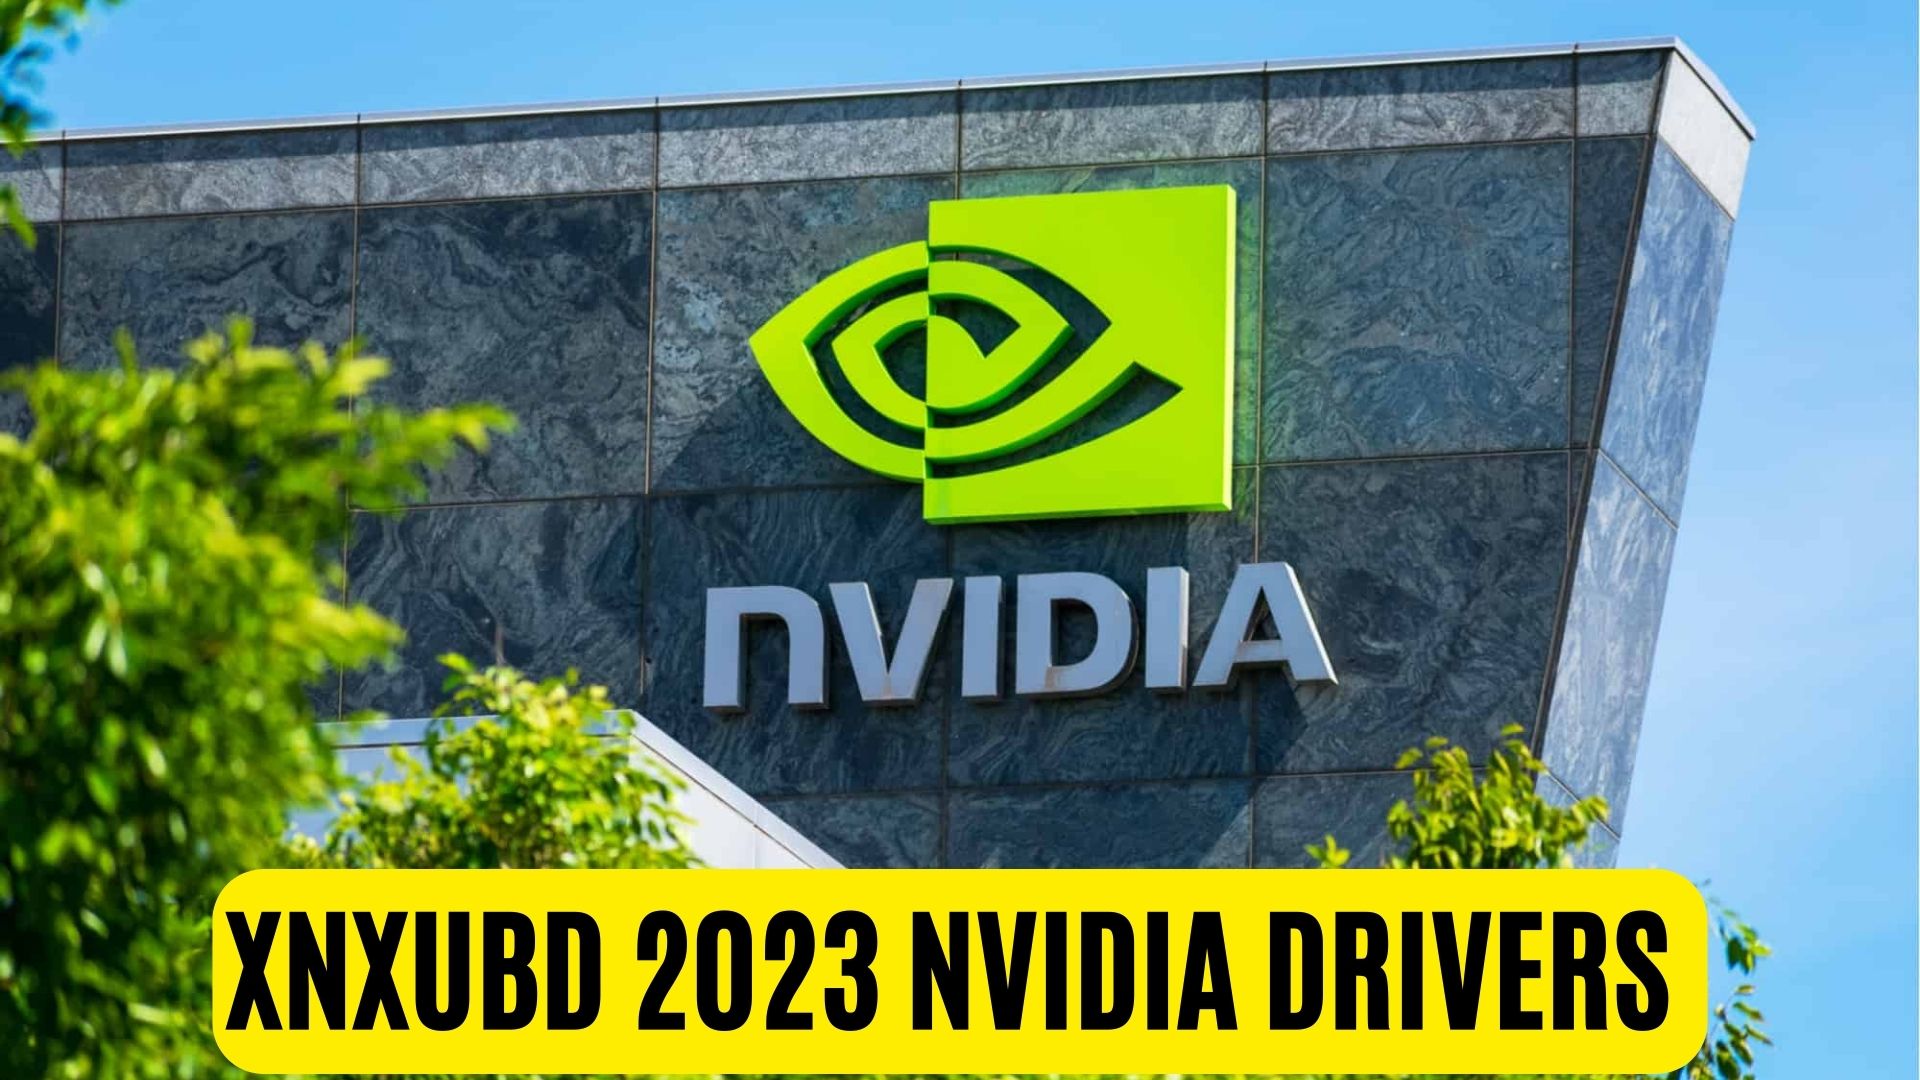 Xnxubd 2023 Nvidia Drivers - Impact Of Outdated Nvidia Drivers